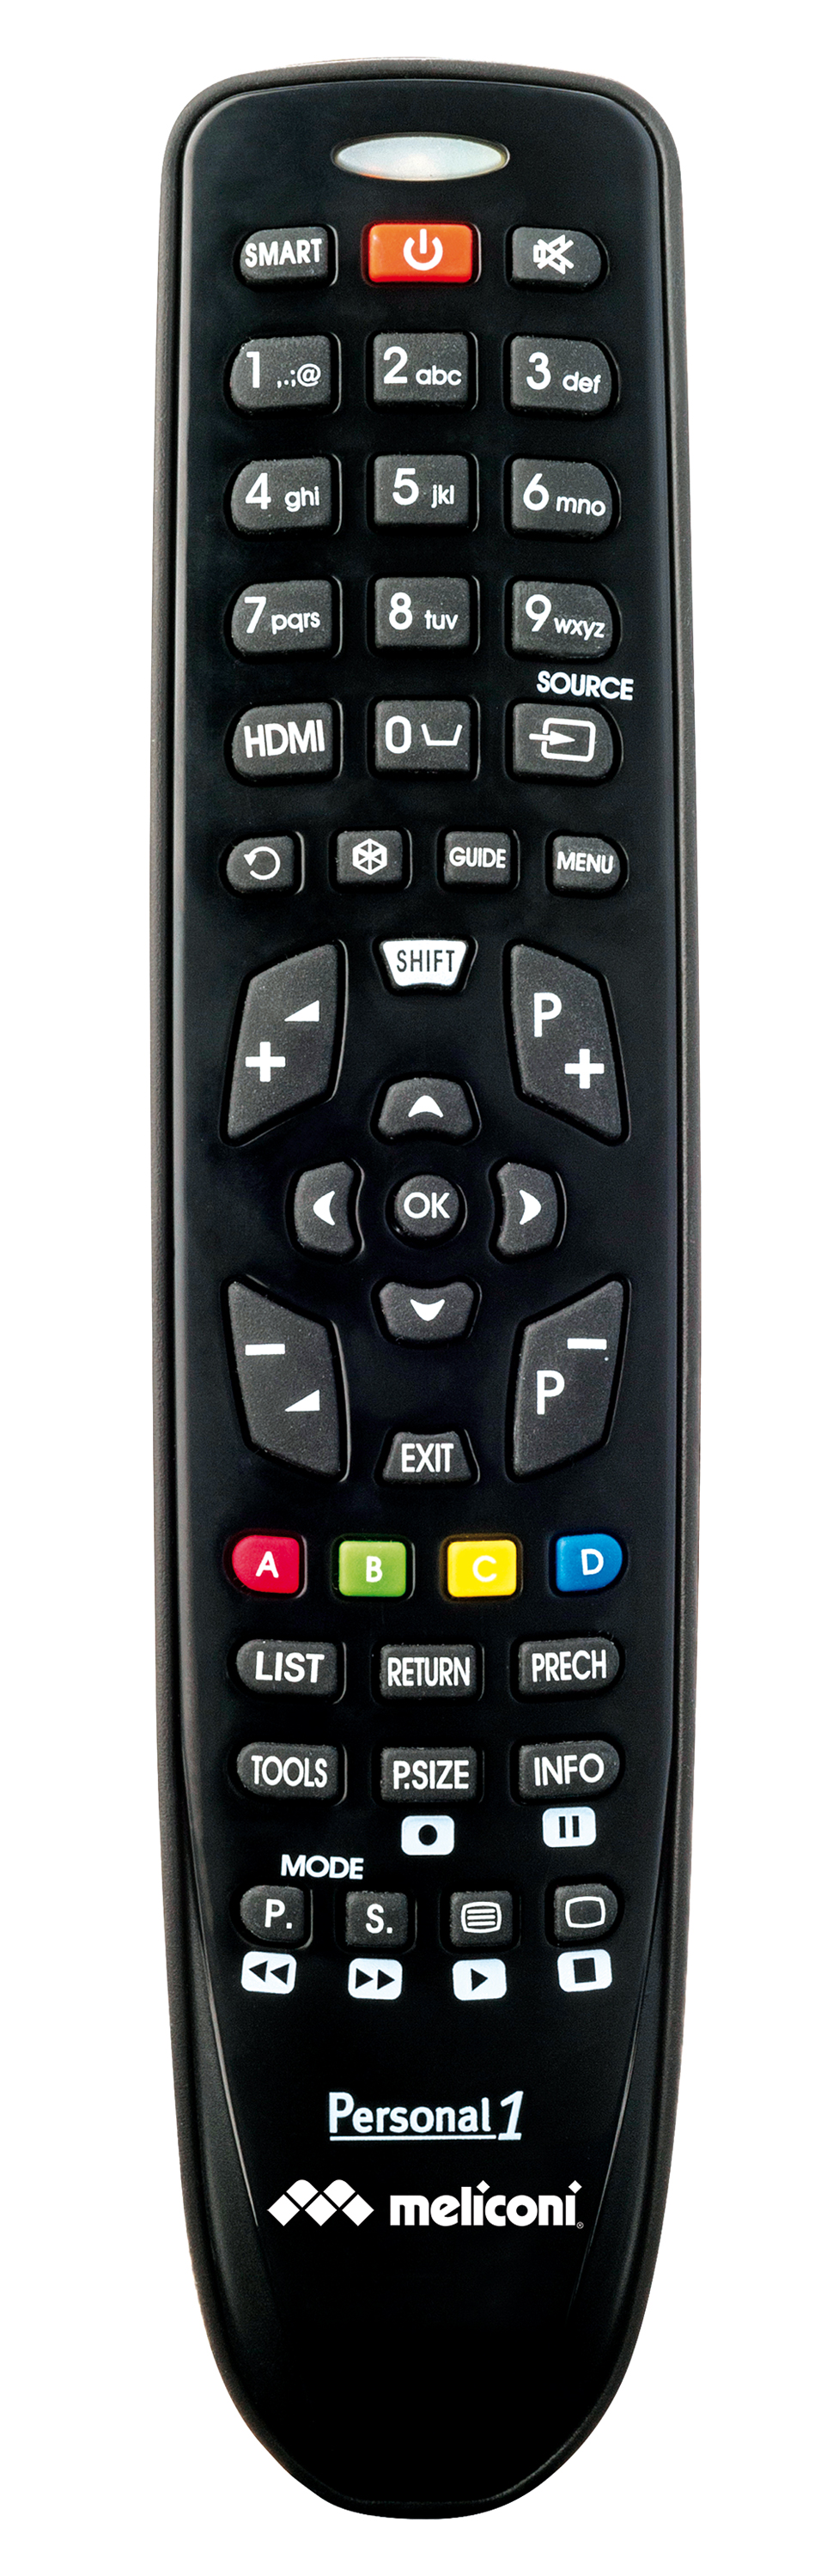 Gumbody personal 1, universal remote control Samsung tv ready to use rubber body, black